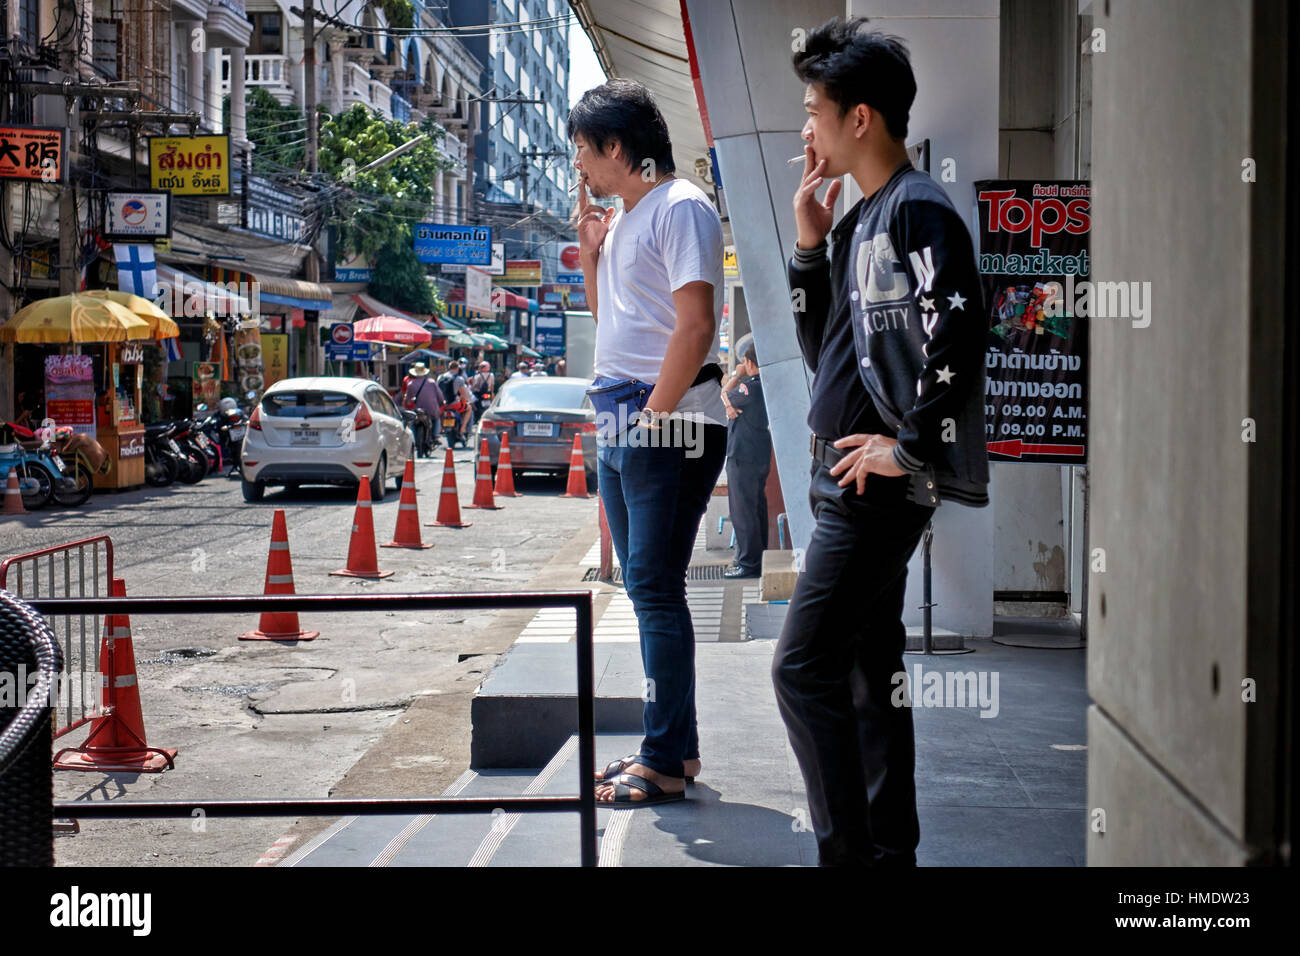 Young Asian men stepping outside of a shopping mall to smoke cigarettes in the accepted smoking area. Thailand Southeast Asia Stock Photo